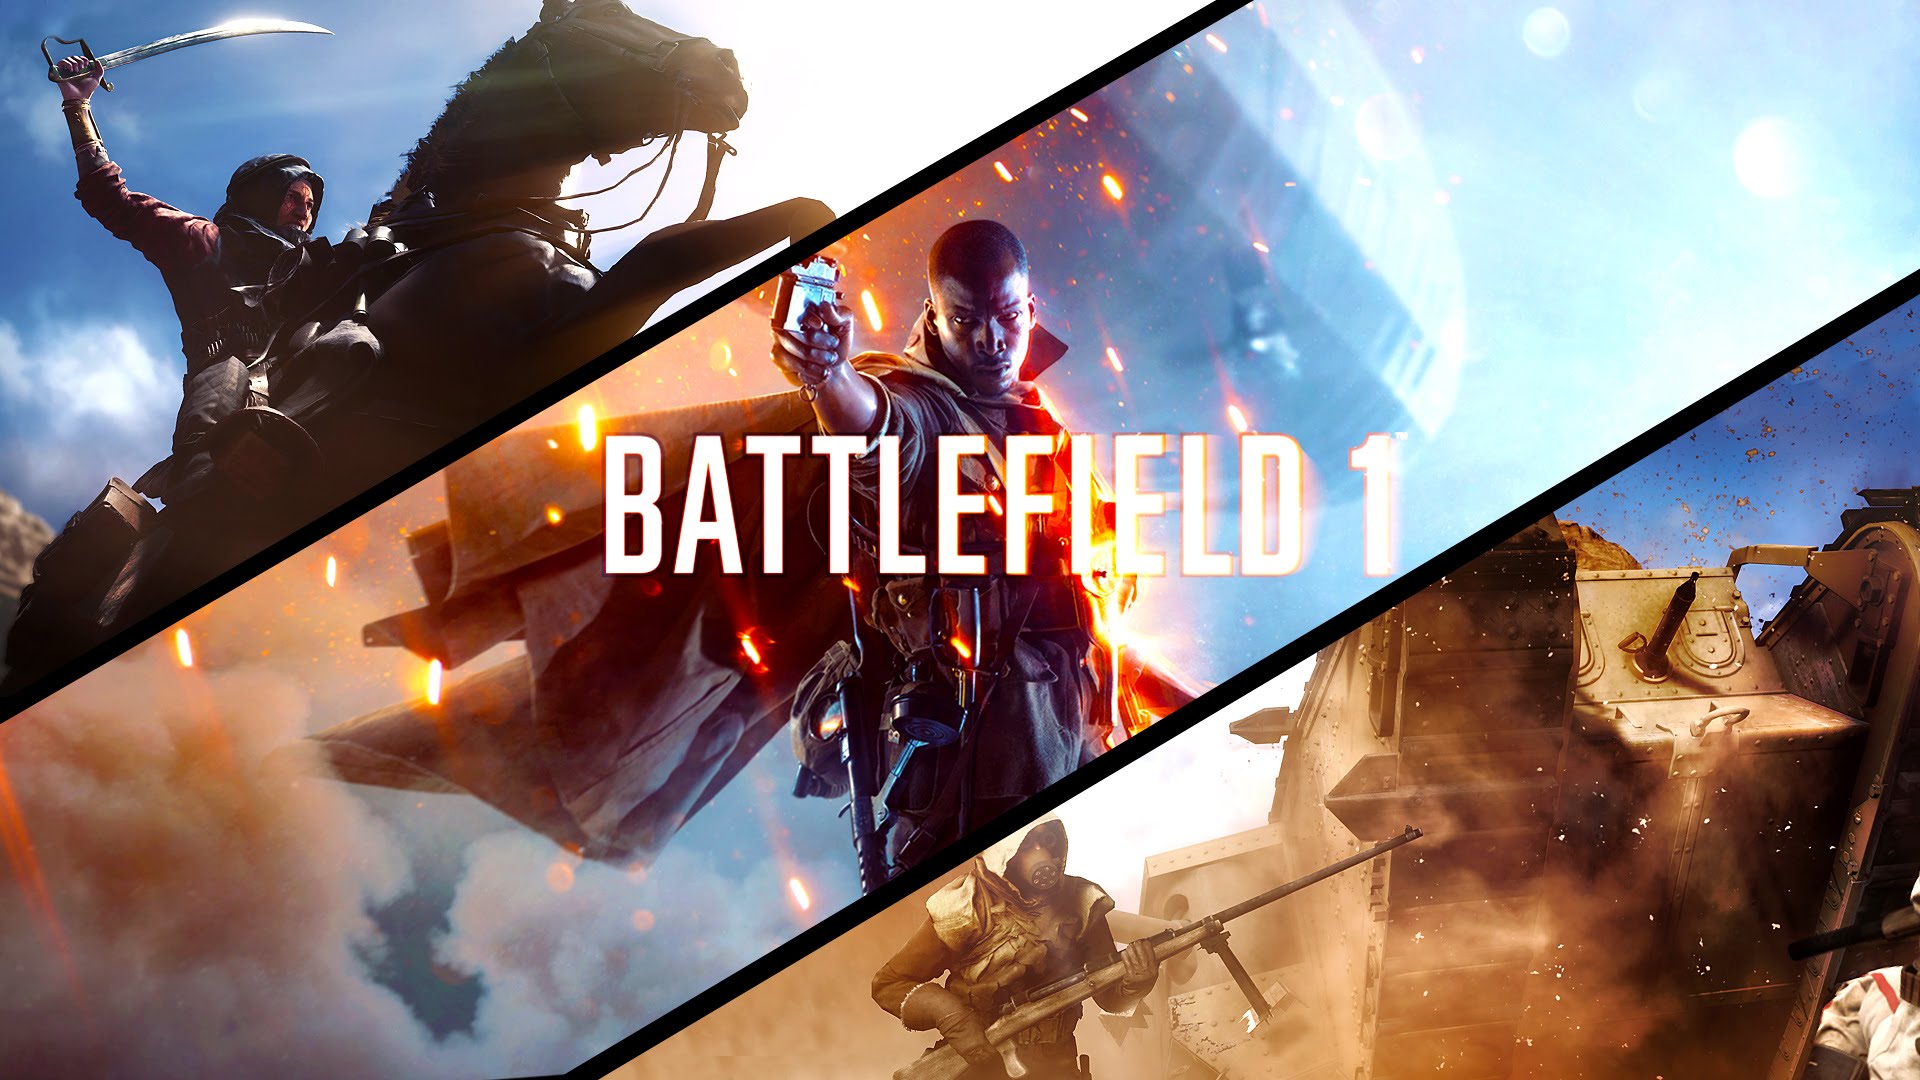 dæk Somatisk celle bred Battlefield 1 coming soon for Xbox One and PS4 | PlayNTrade | Garner |  Trade and Buy Video Games and Consoles